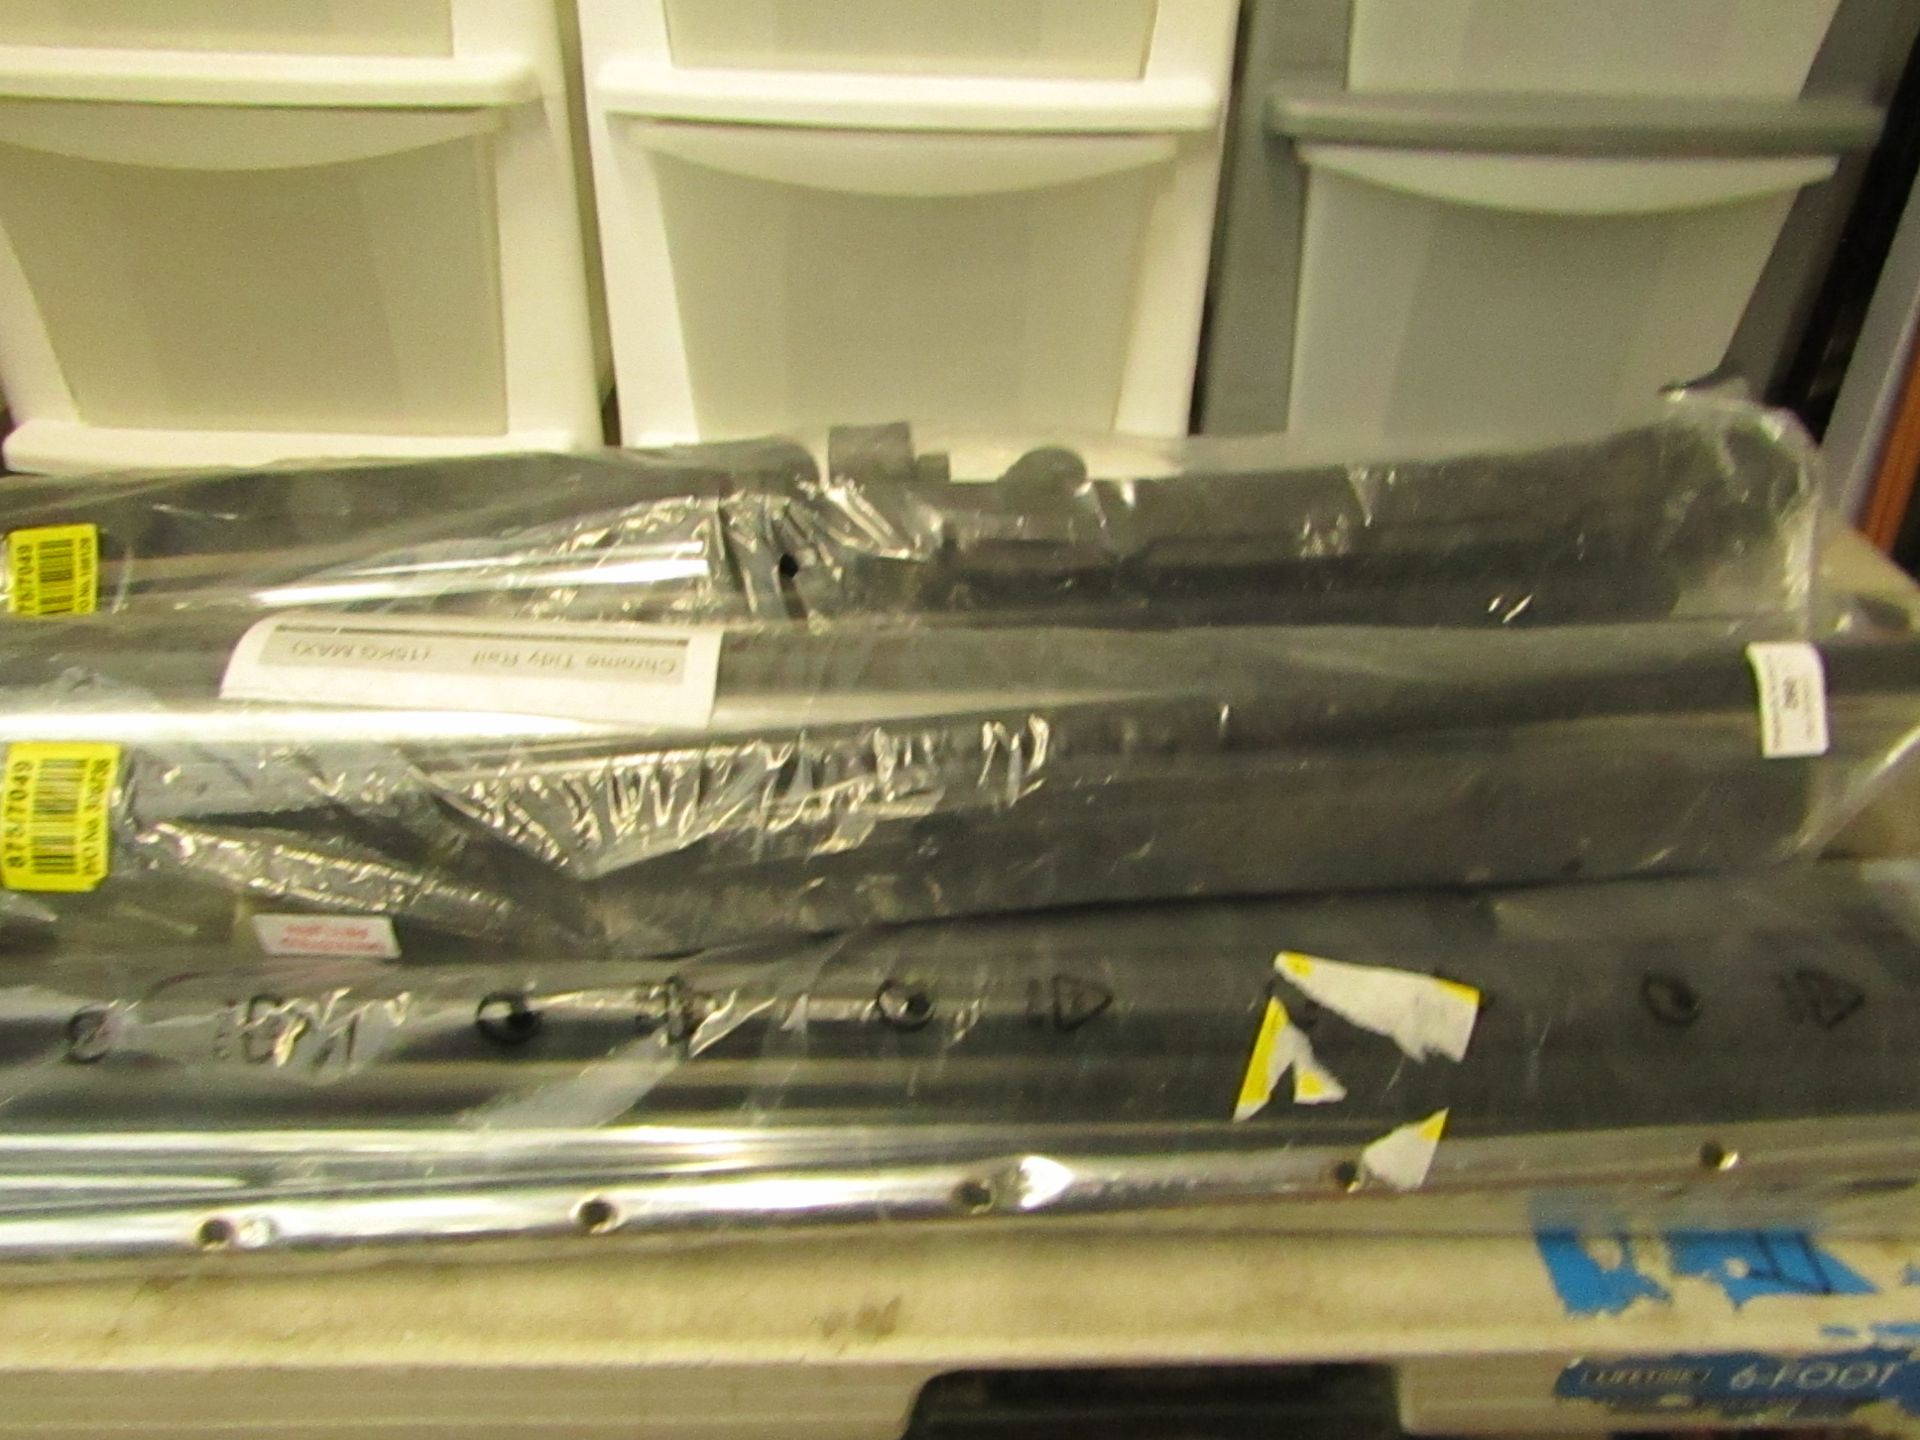 5x Chrome tidy rails, all unchecked and in packaging.